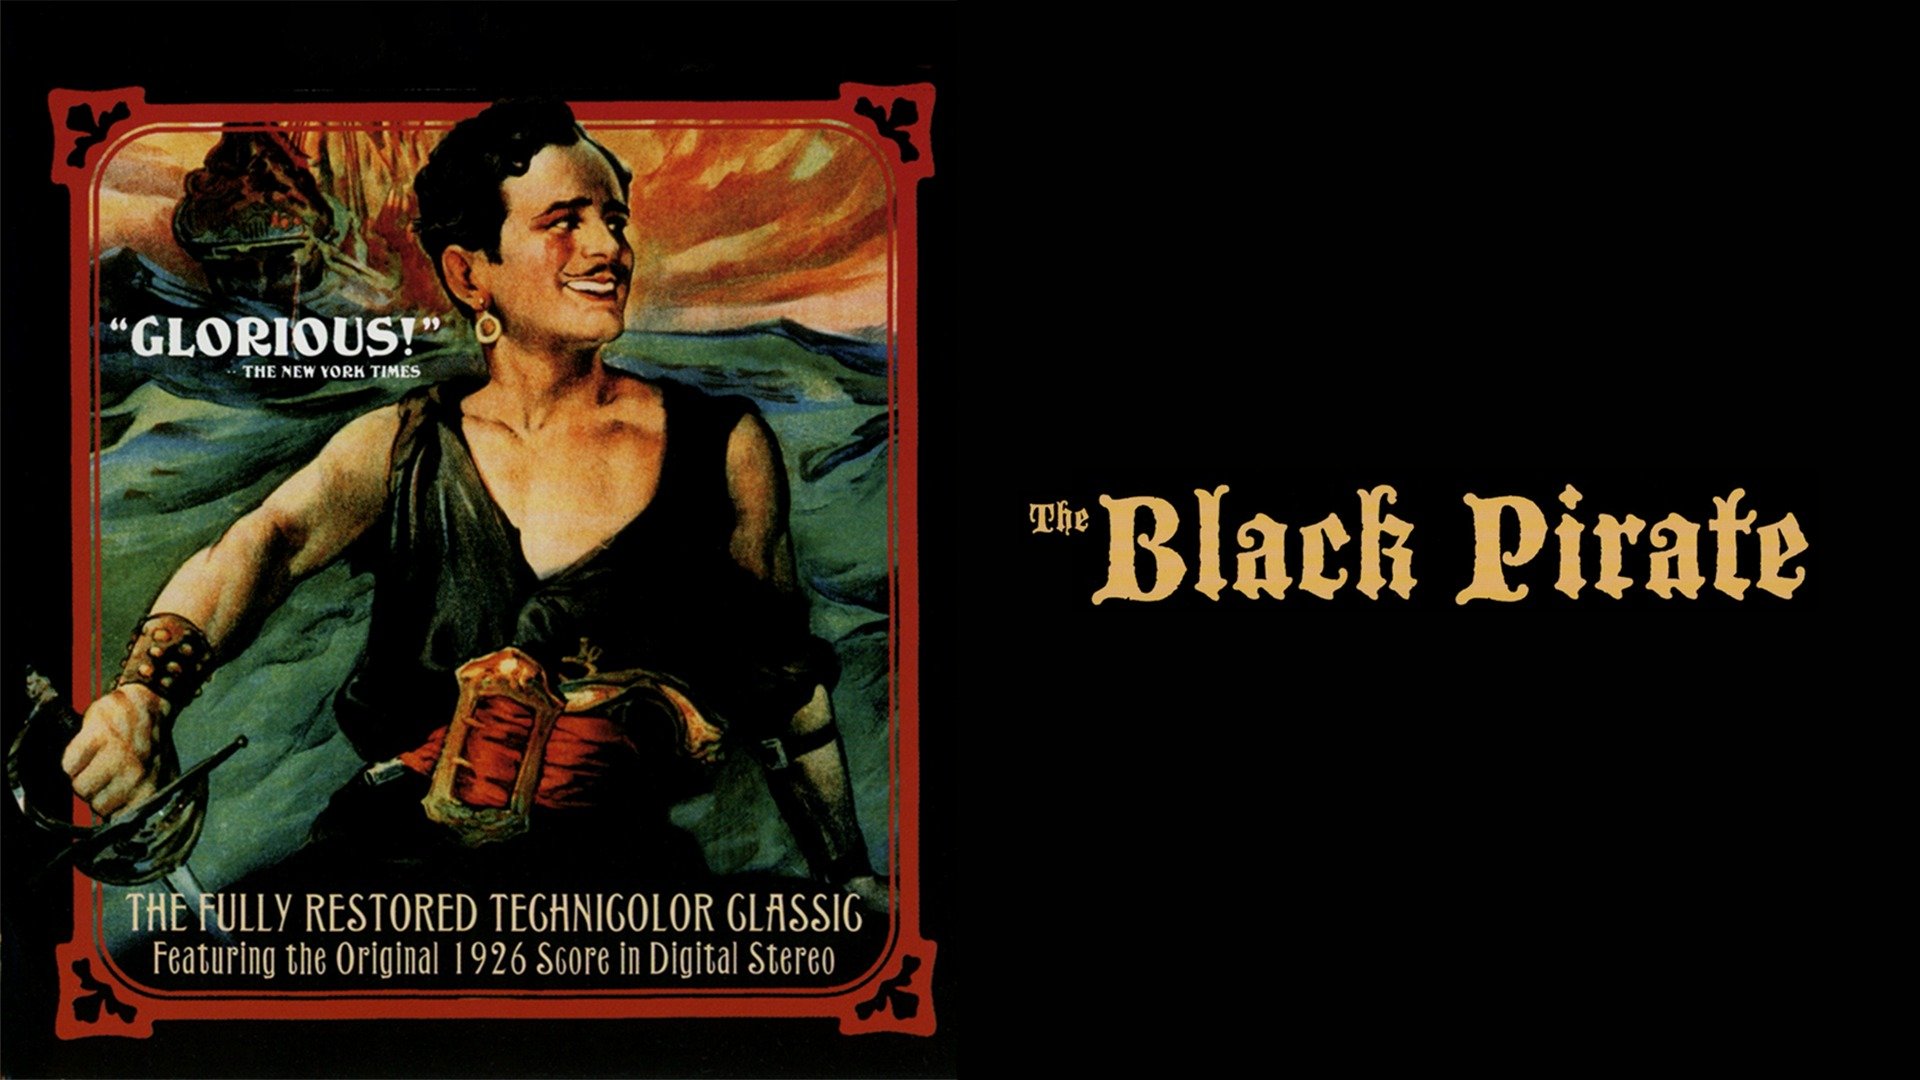 42-facts-about-the-movie-the-black-pirate